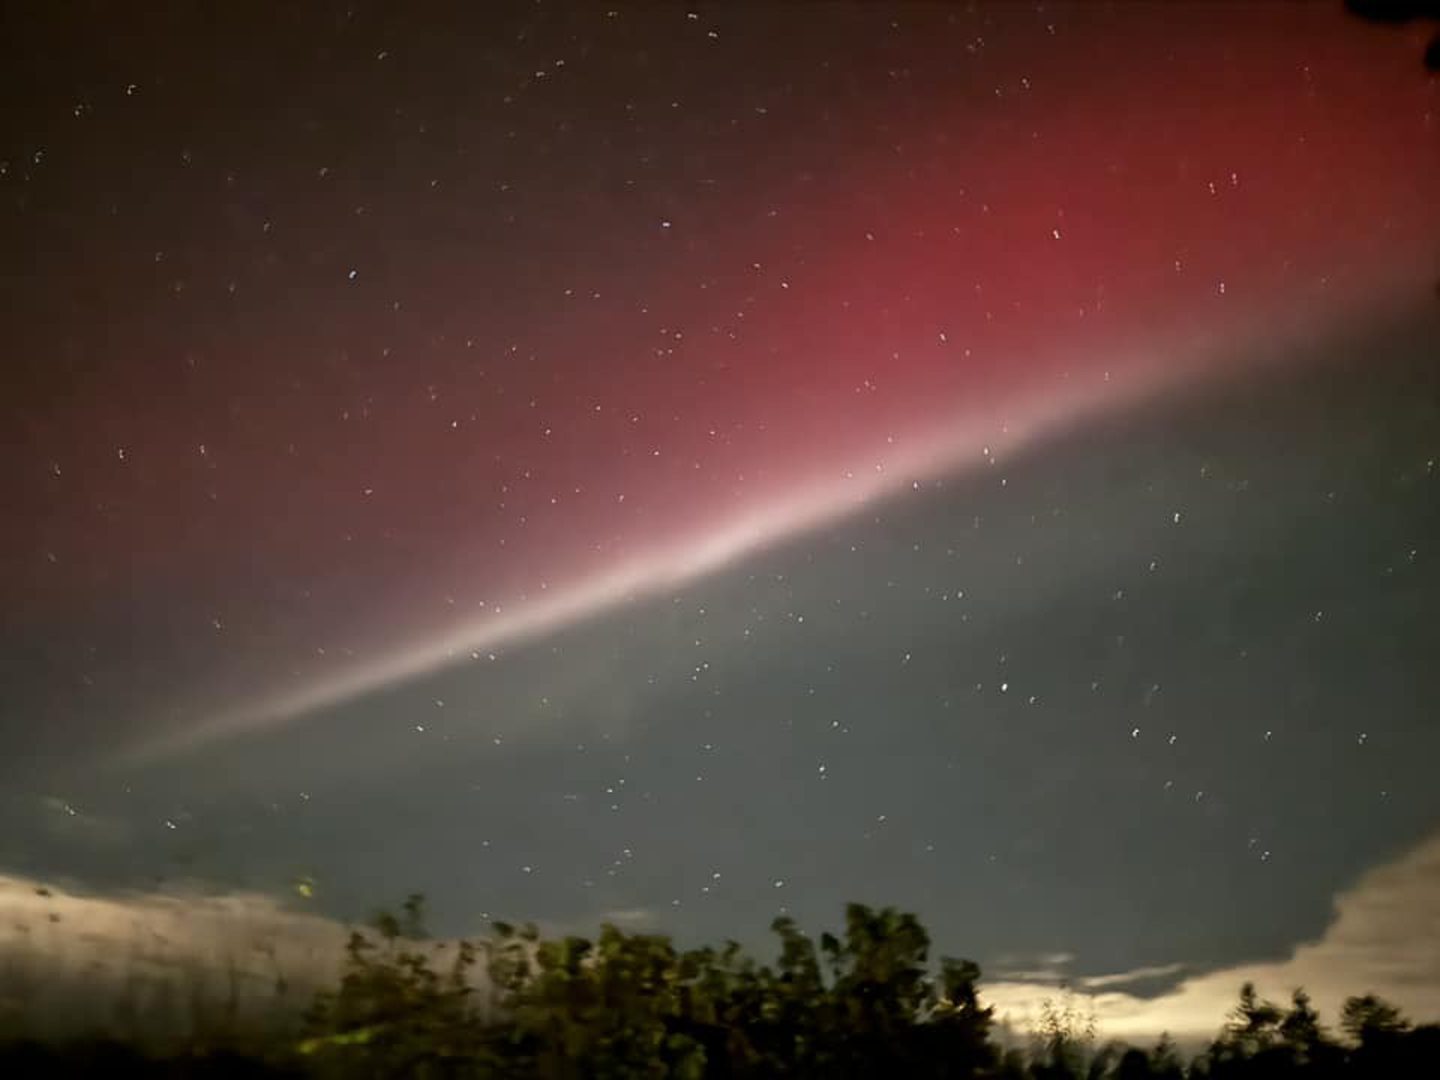 A red streak of the Northern Lights near Forfar